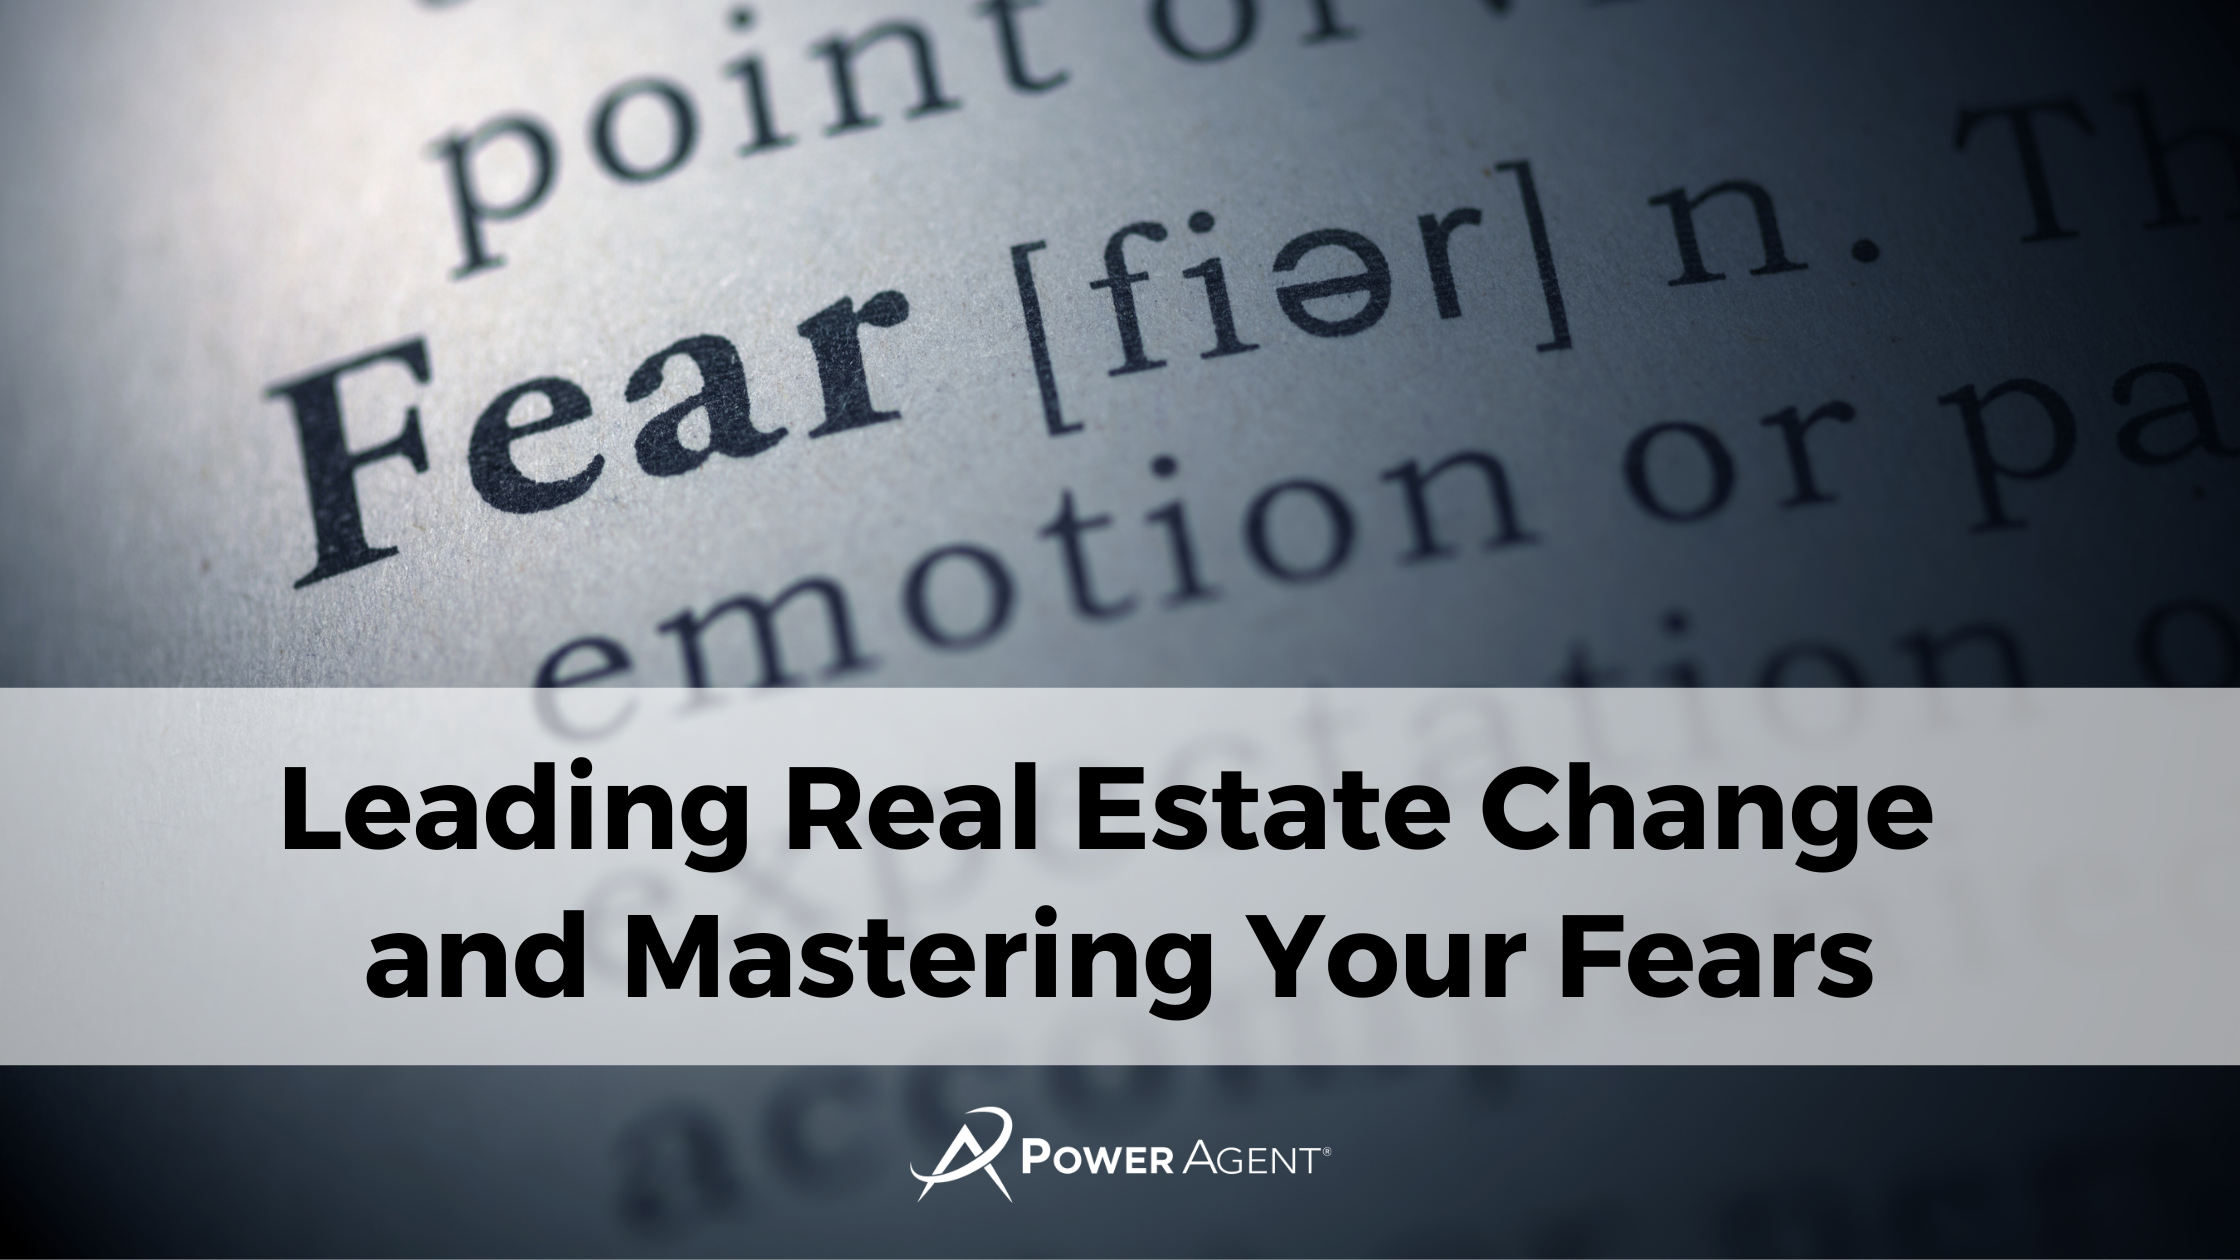 Leading Real Estate Change and Mastering Your Fears